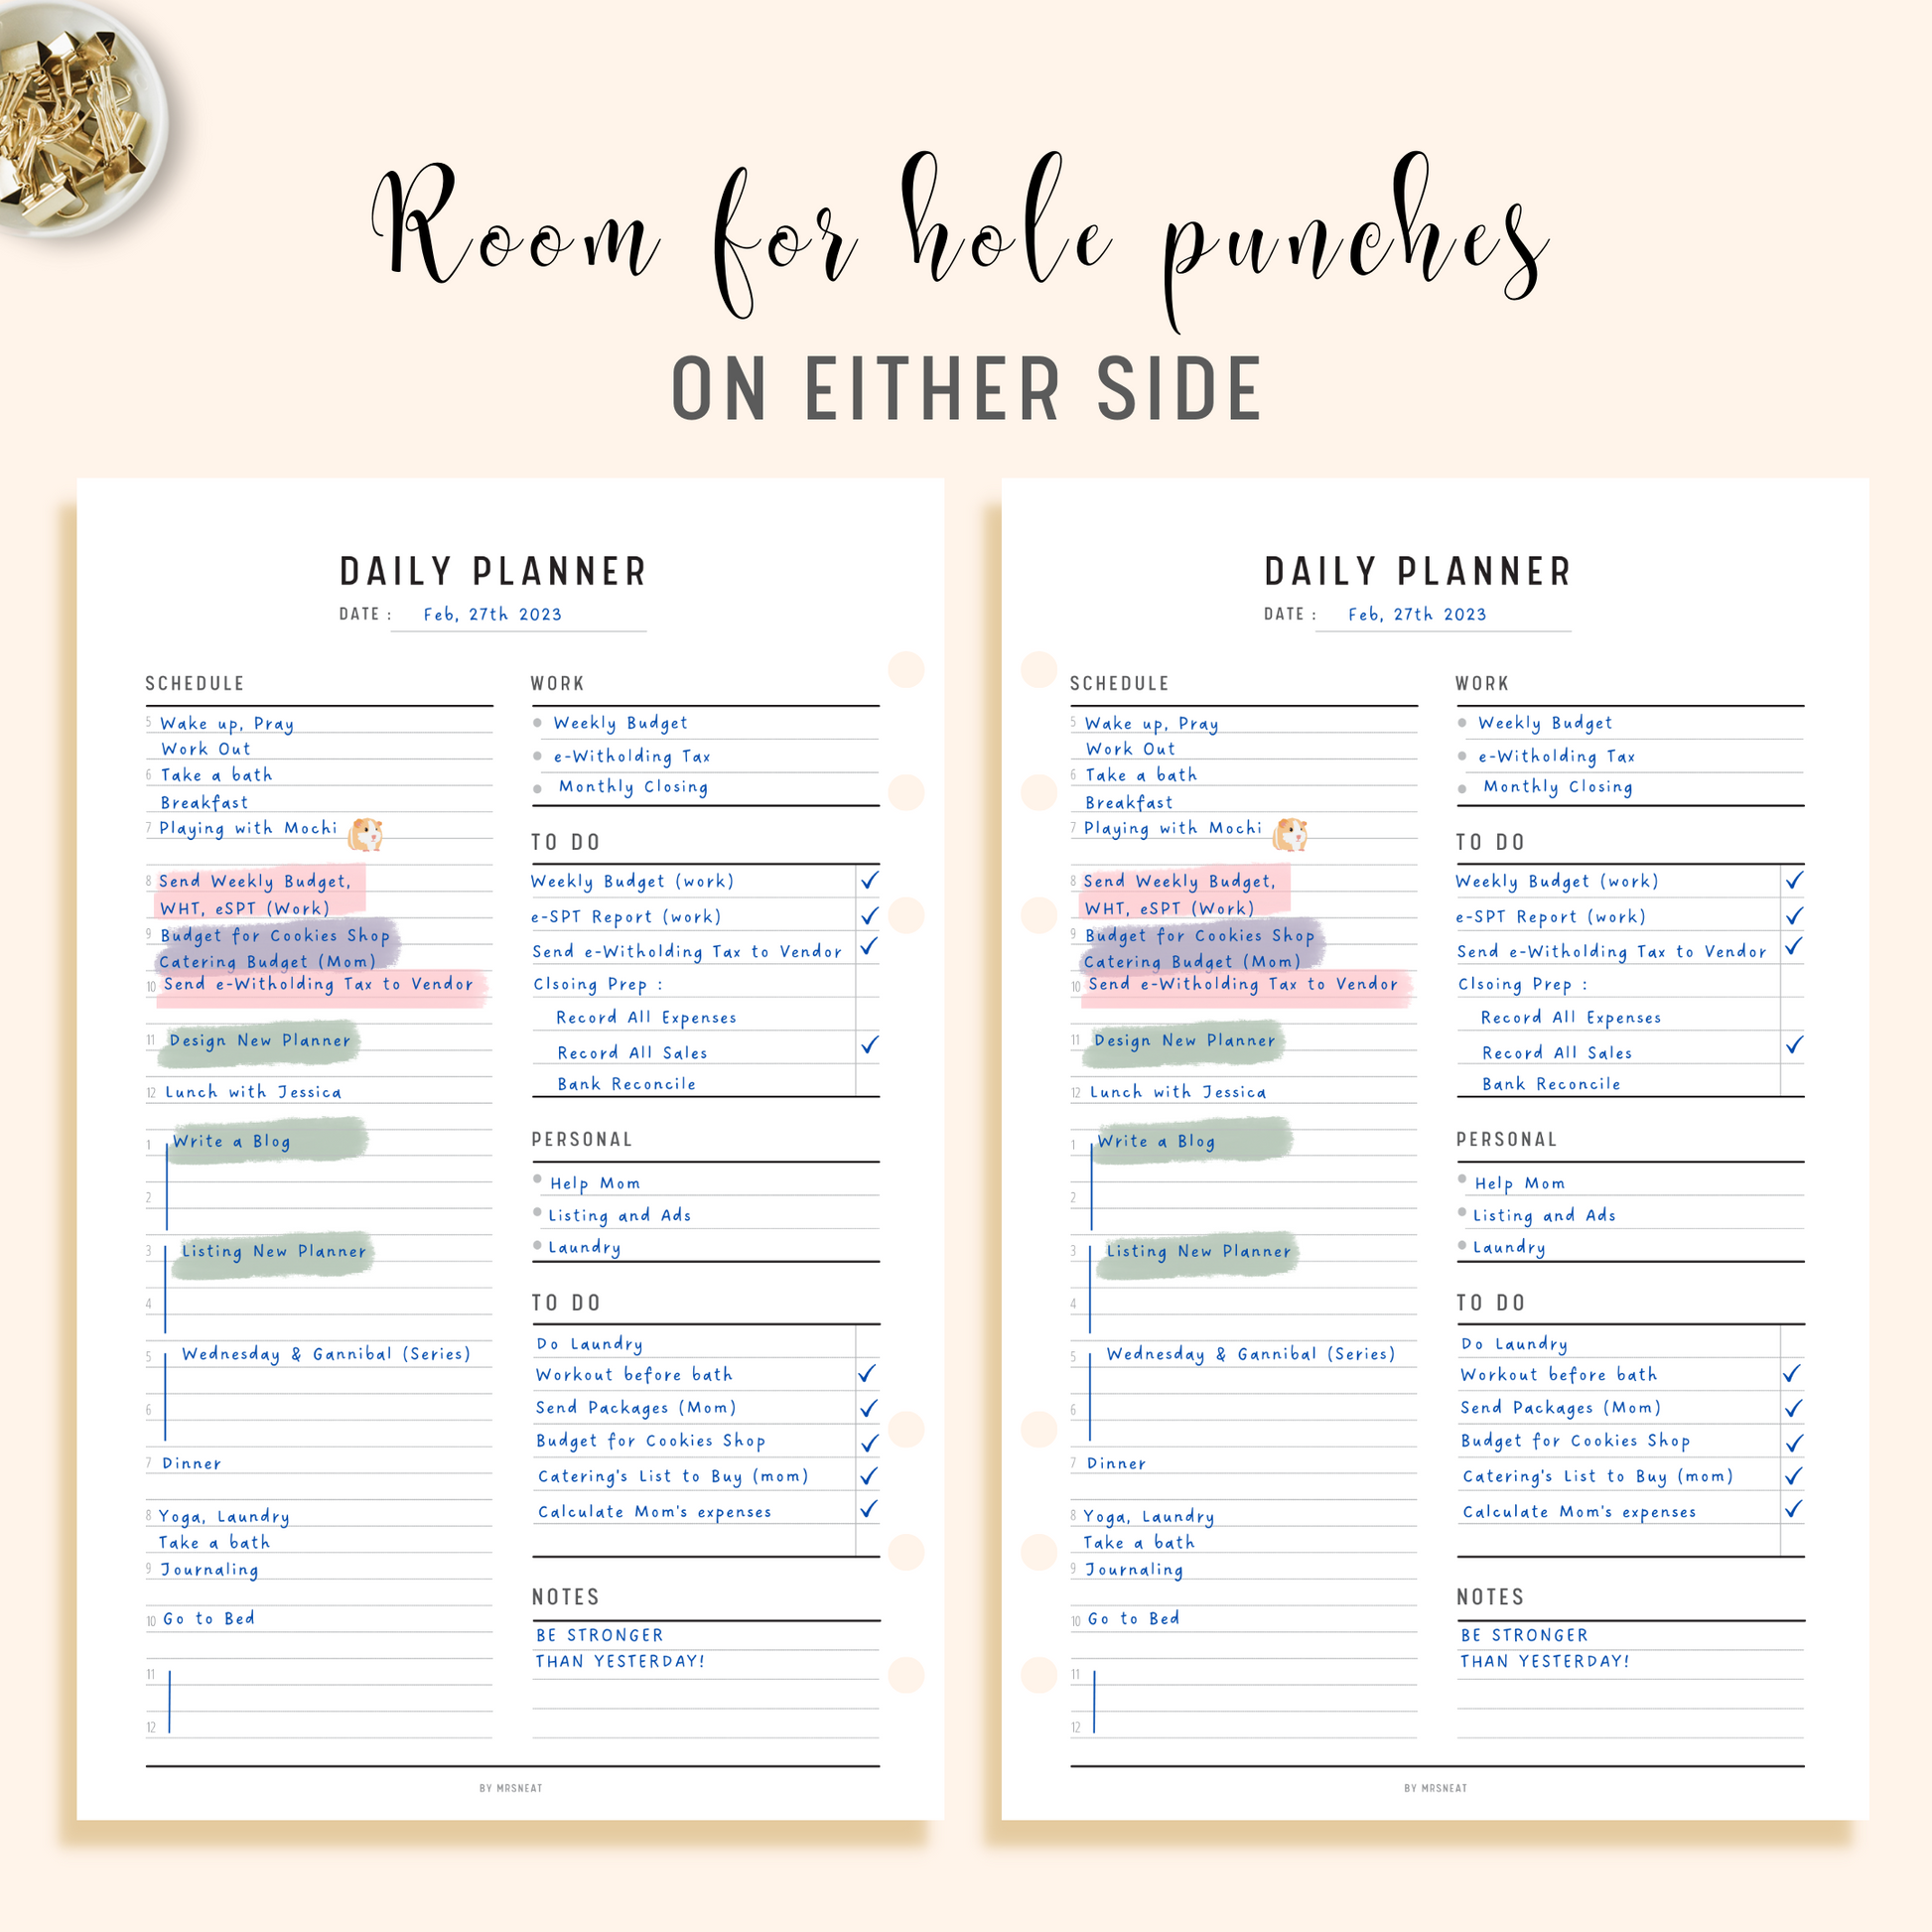 Work from Home Daily Planner Printable with room for hole punches on either side